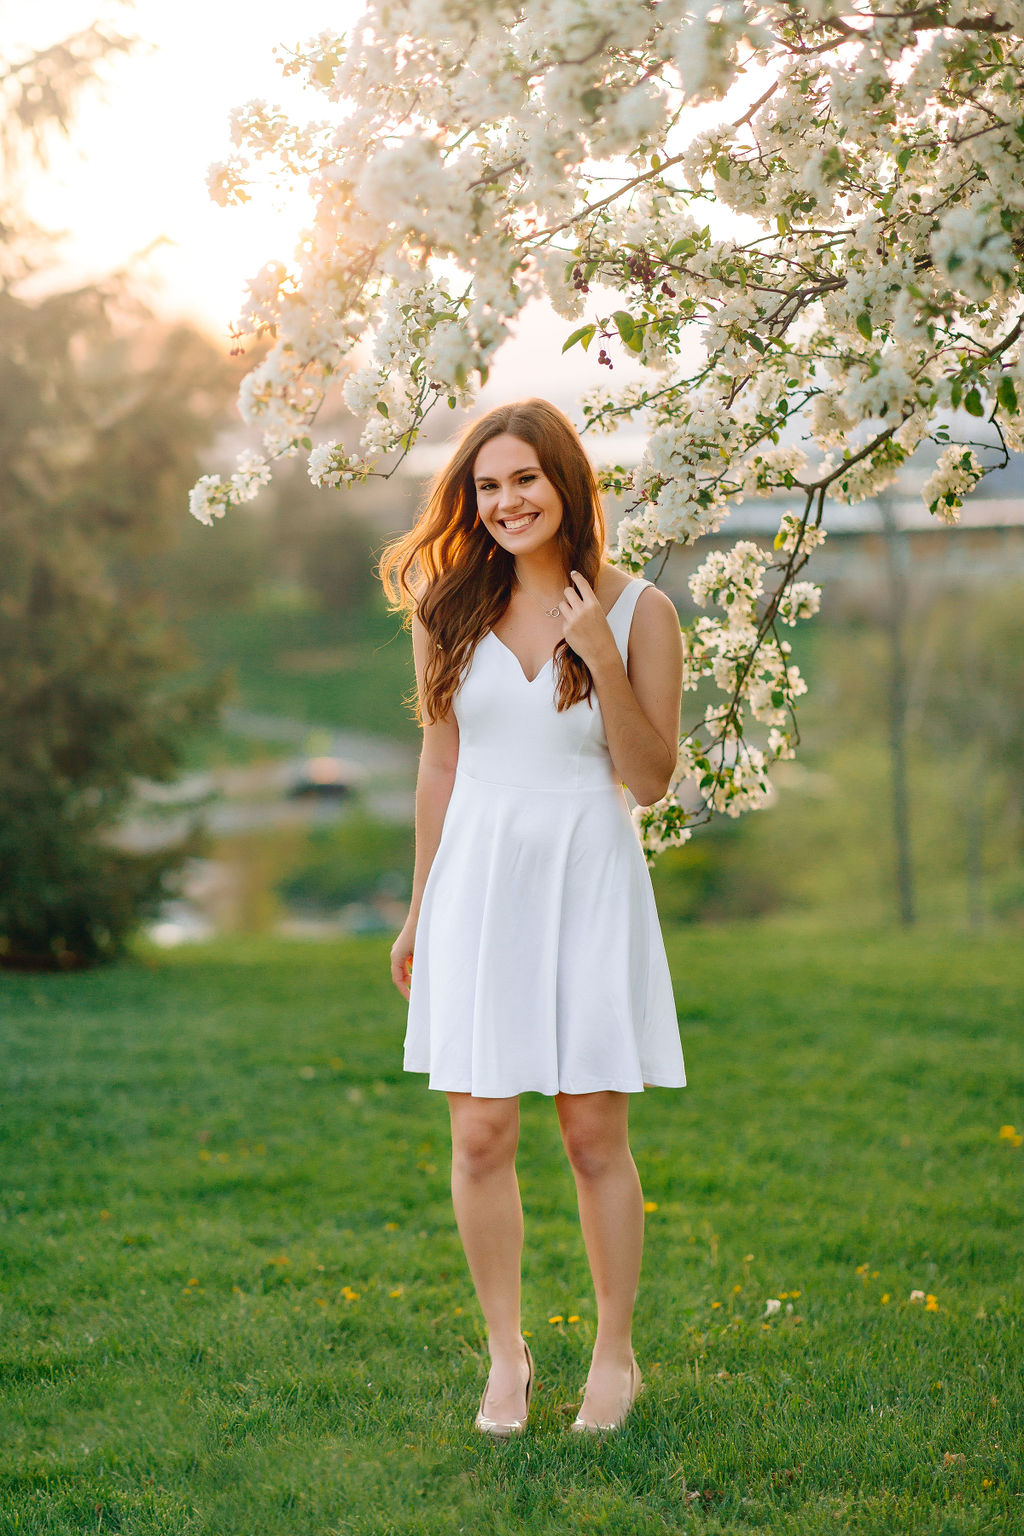 A college grad in a white dress stands under a flowering tree at sunset after taking jmu dual enrollment courses